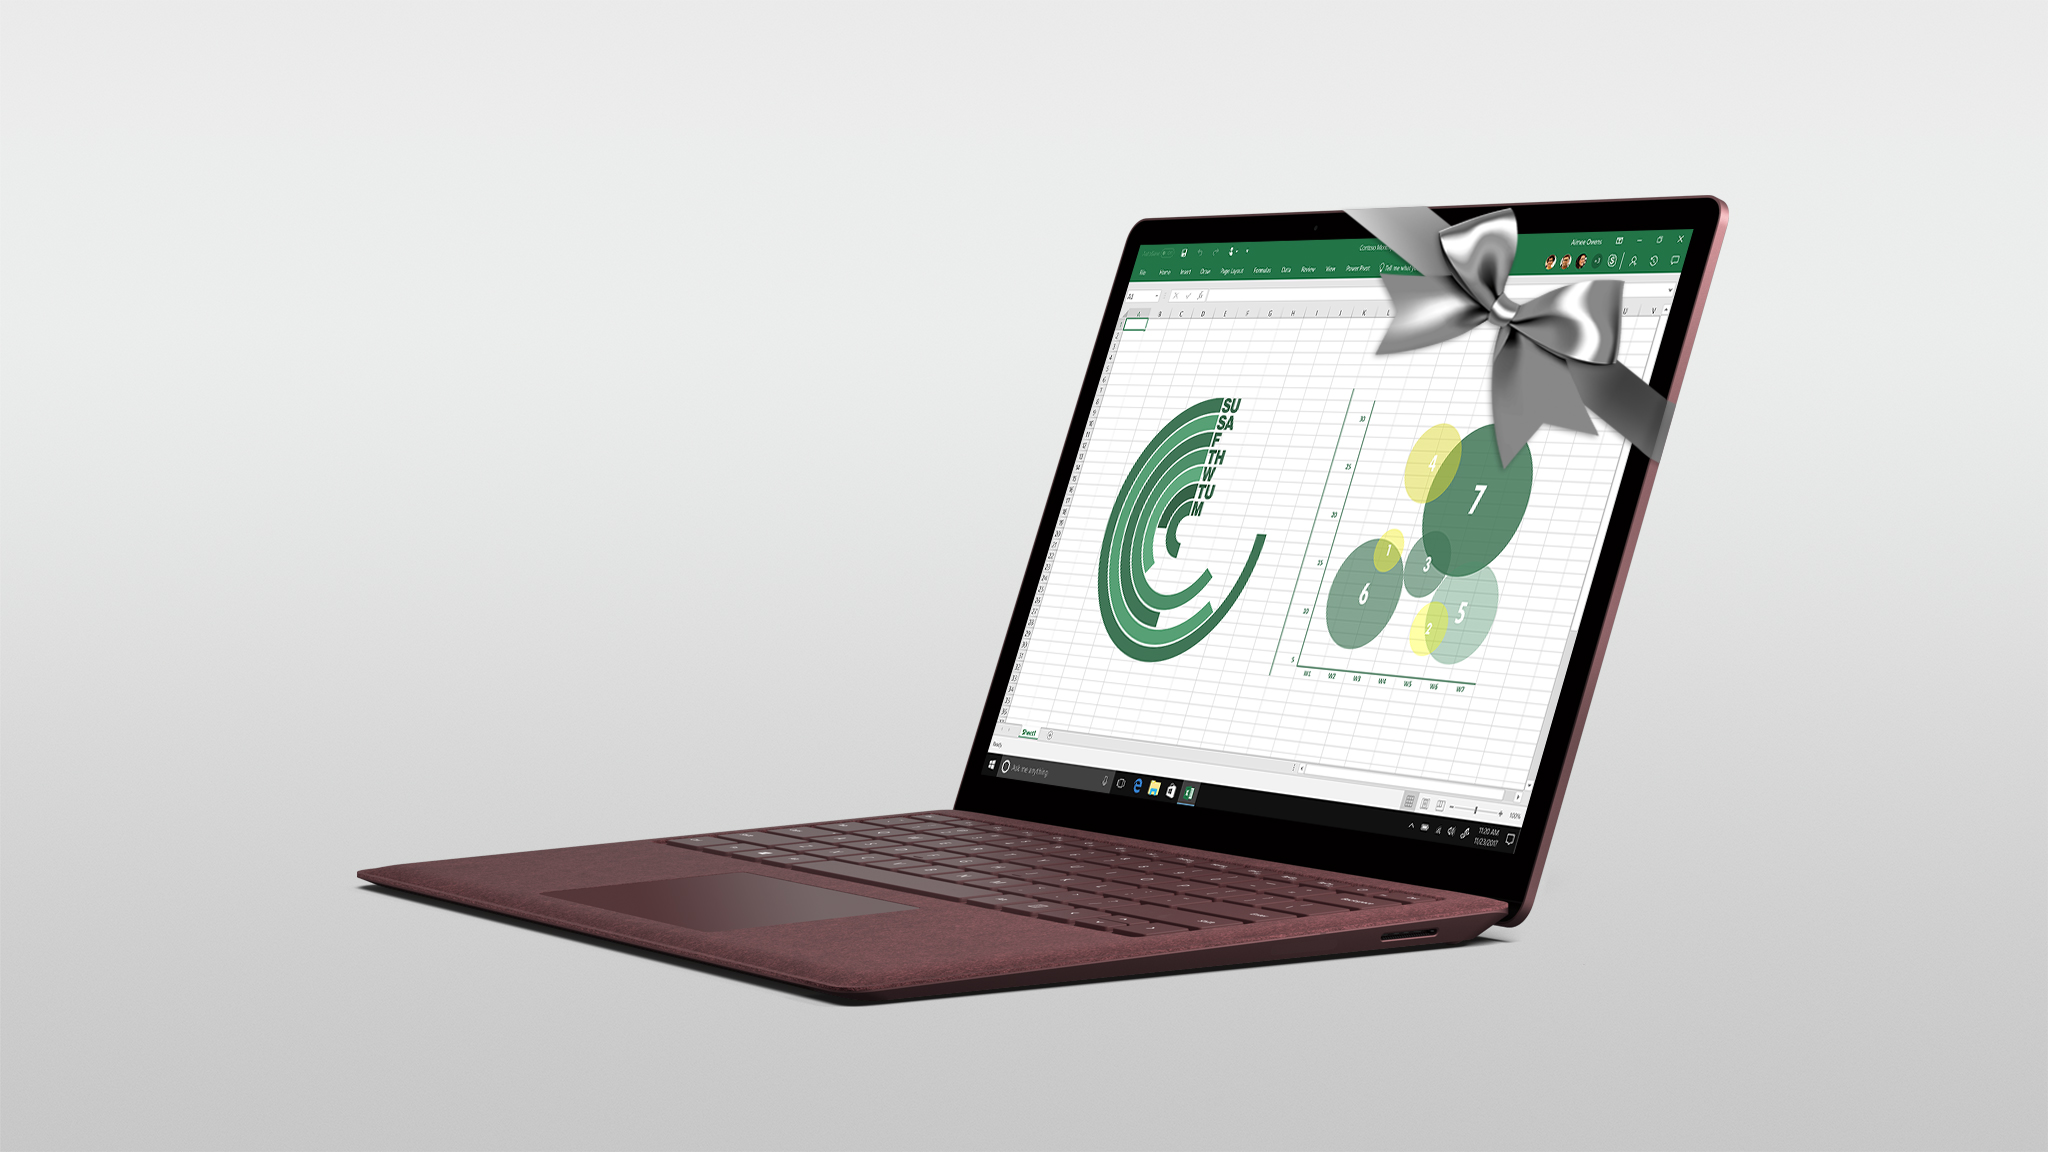 Surface Laptop in Burgundy wrapped in a silver bow with Excel shown on the screen.